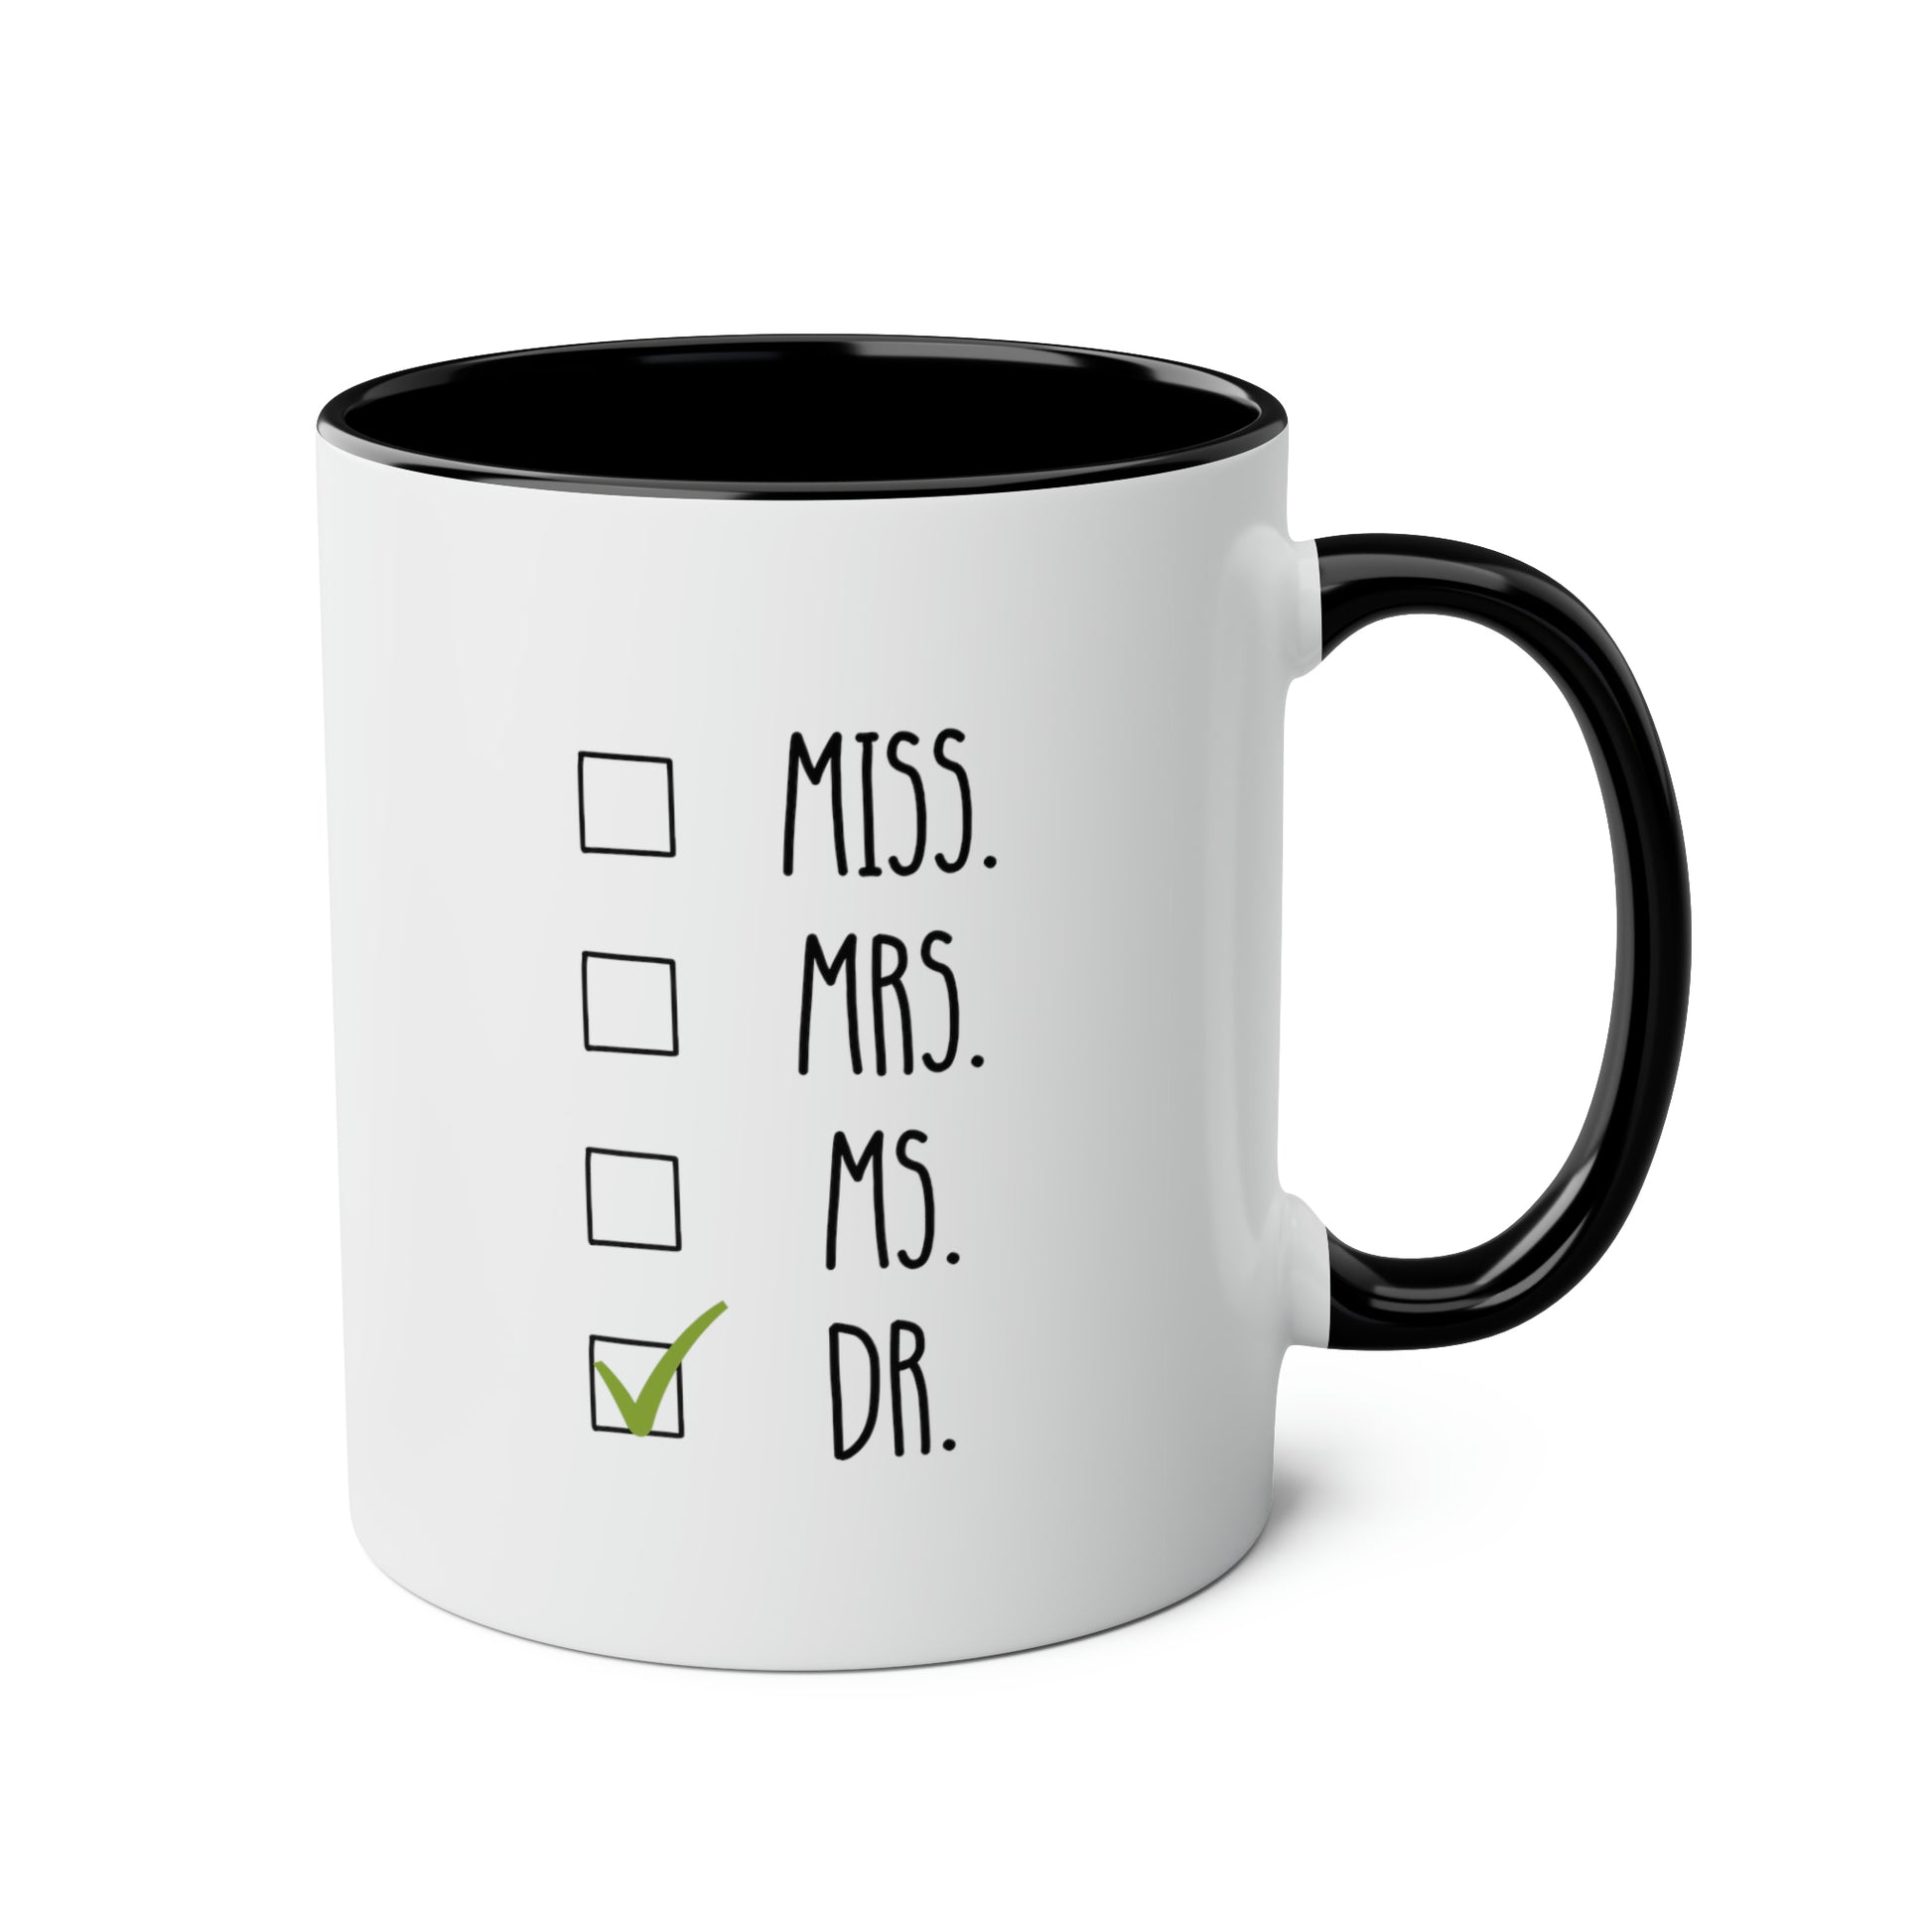 Doctor 11oz white with black accent funny large coffee mug gift for new doctor dr graduation graduate miss mrs PHD custom waveywares wavey wares wavywares wavy wares